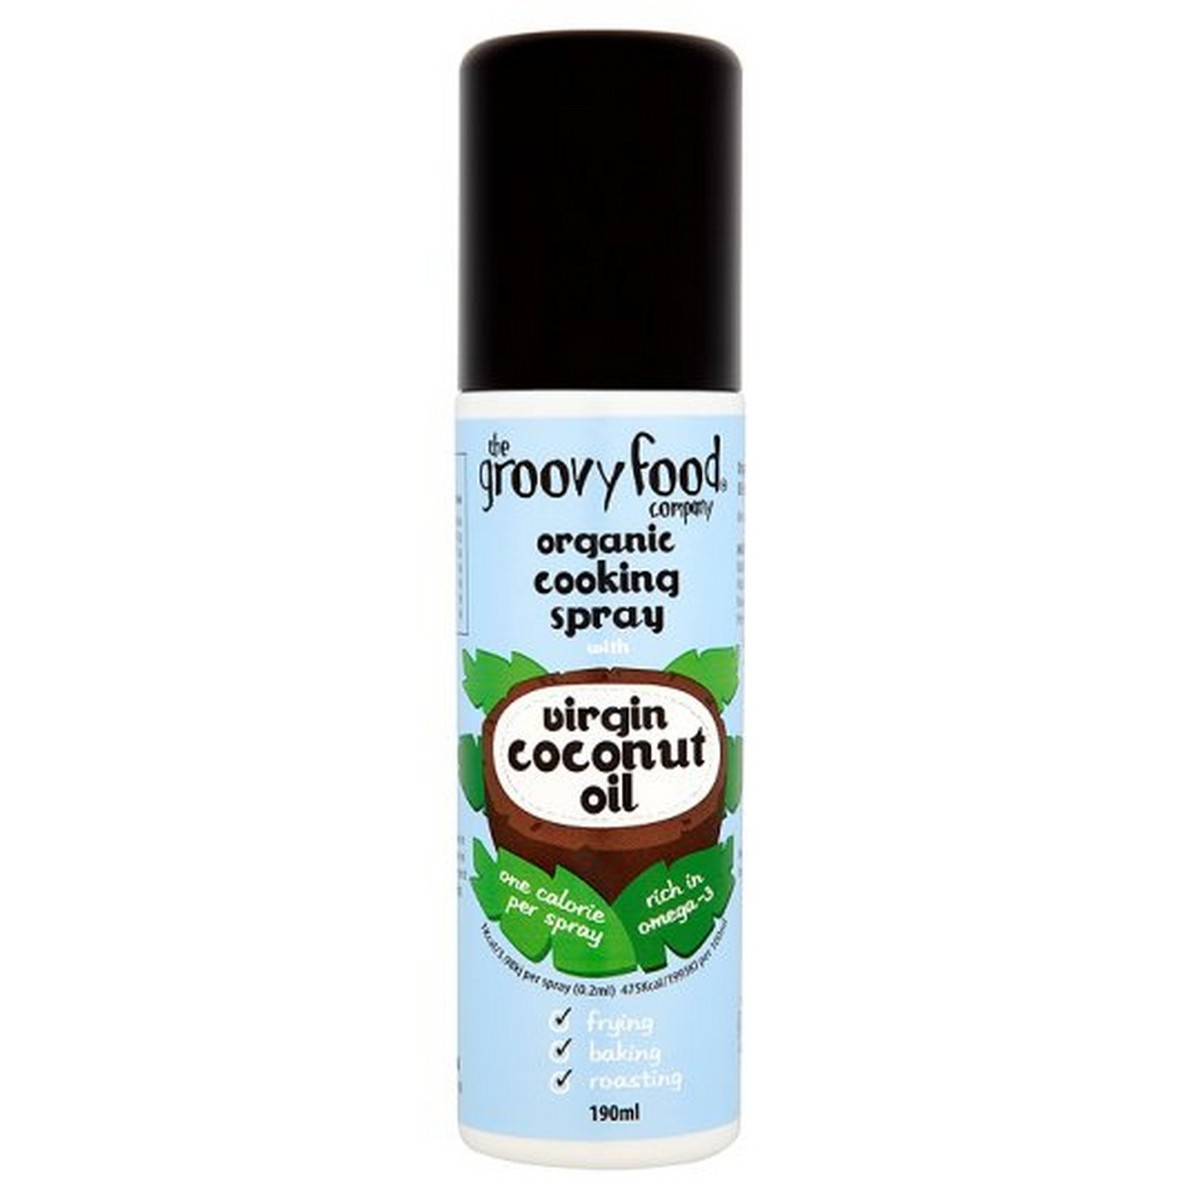 Groovy Food Organic Cooking Spray with Virgin Coconut Oil 190ml